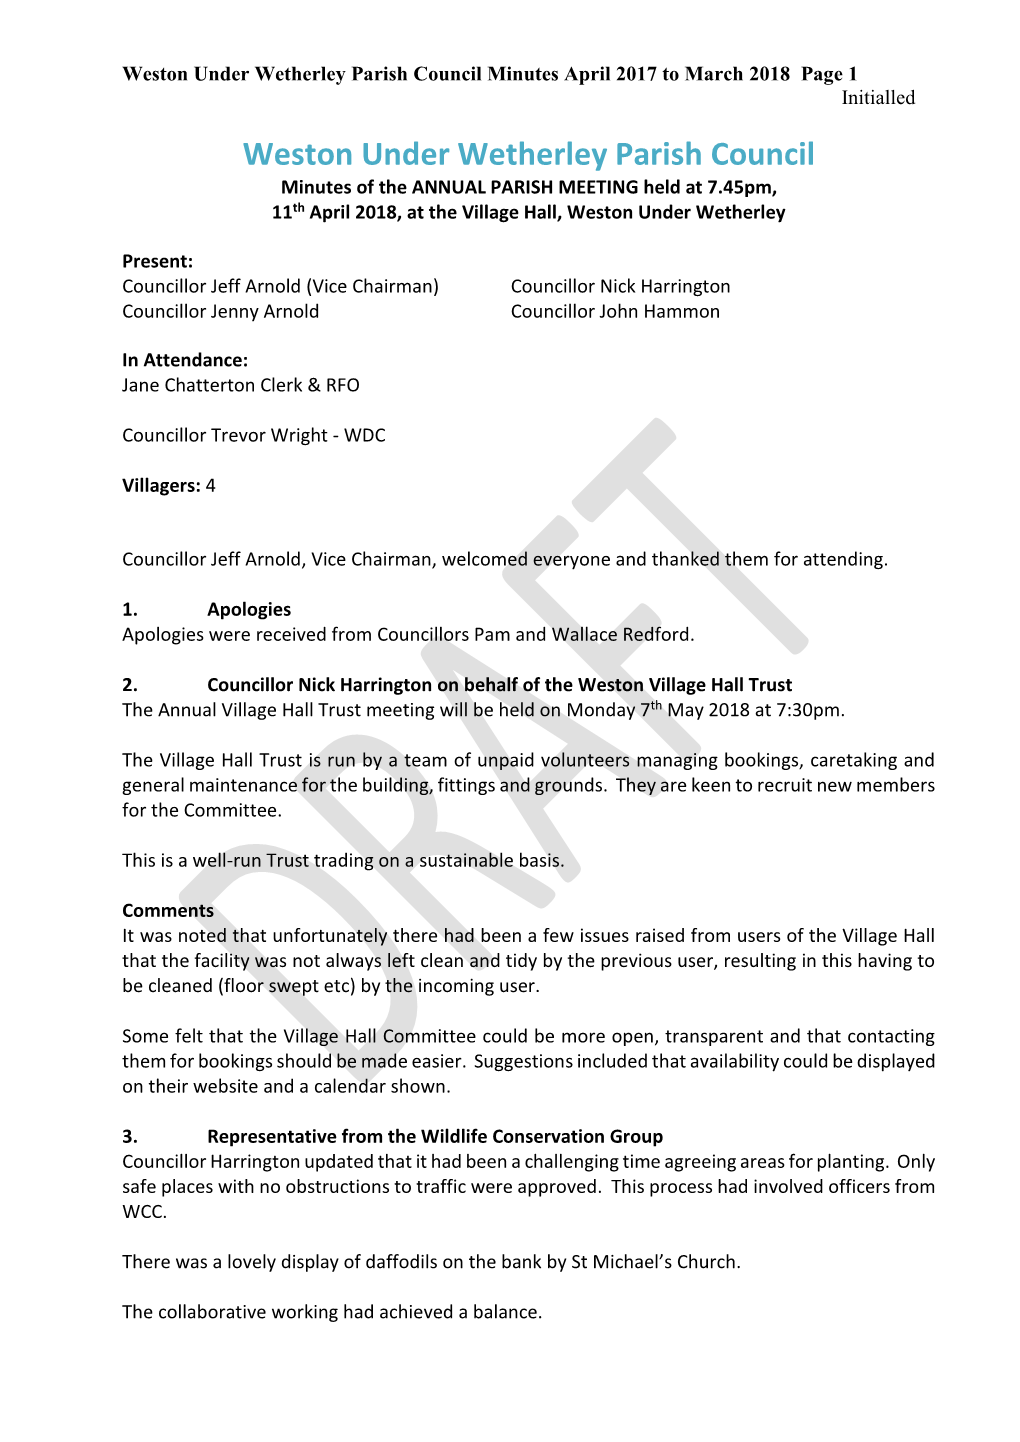 Weston Under Wetherley Parish Council Minutes April 2017 to March 2018 Page 1 Initialled